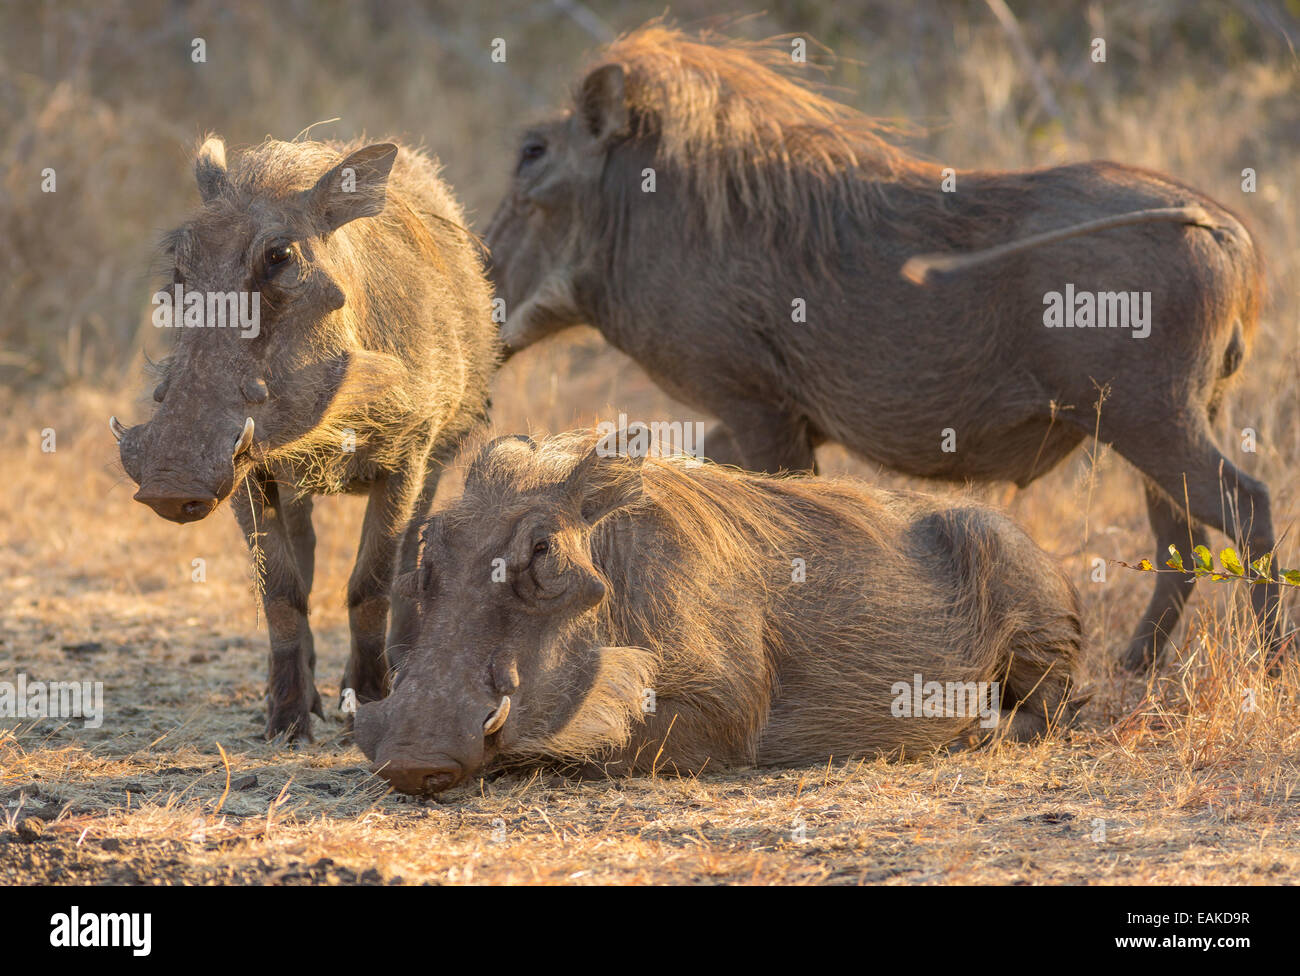 KRUGER NATIONAL PARK, SOUTH AFRICA - Warthogs Stock Photo